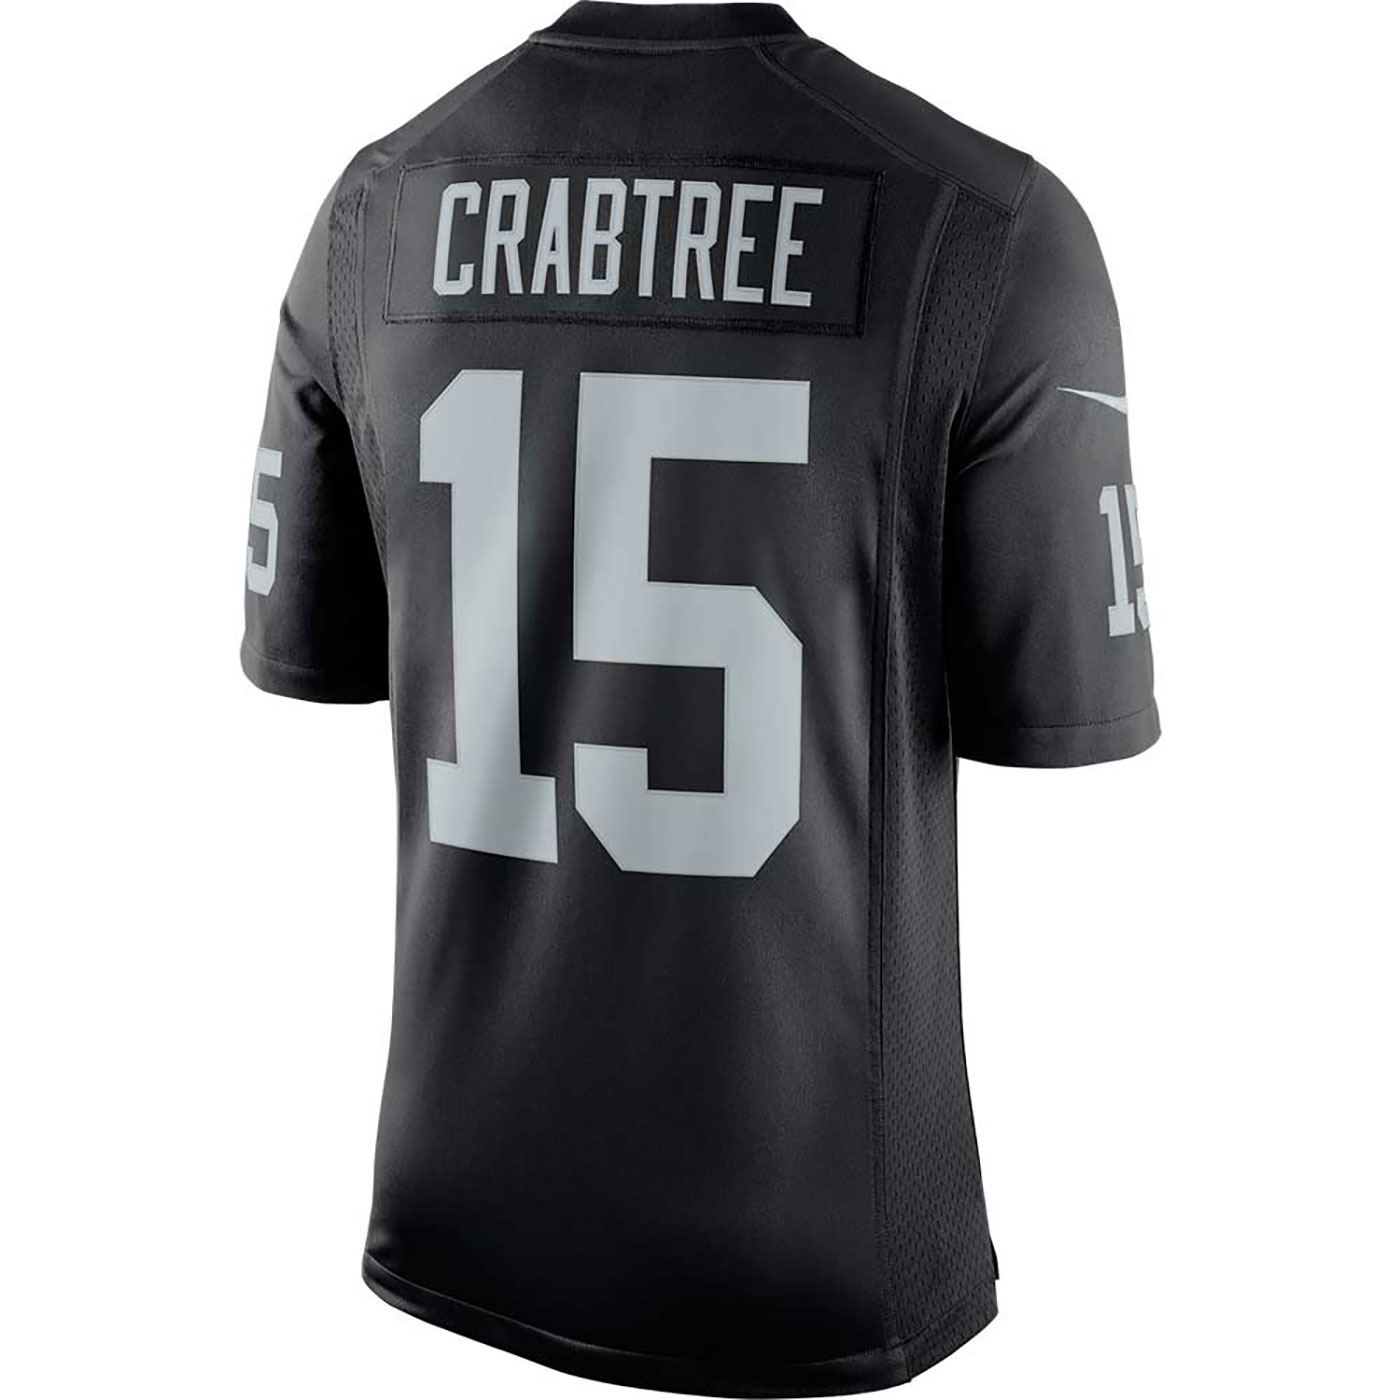 NIKE MICHAEL CRABTREE LIMITED JERSEY